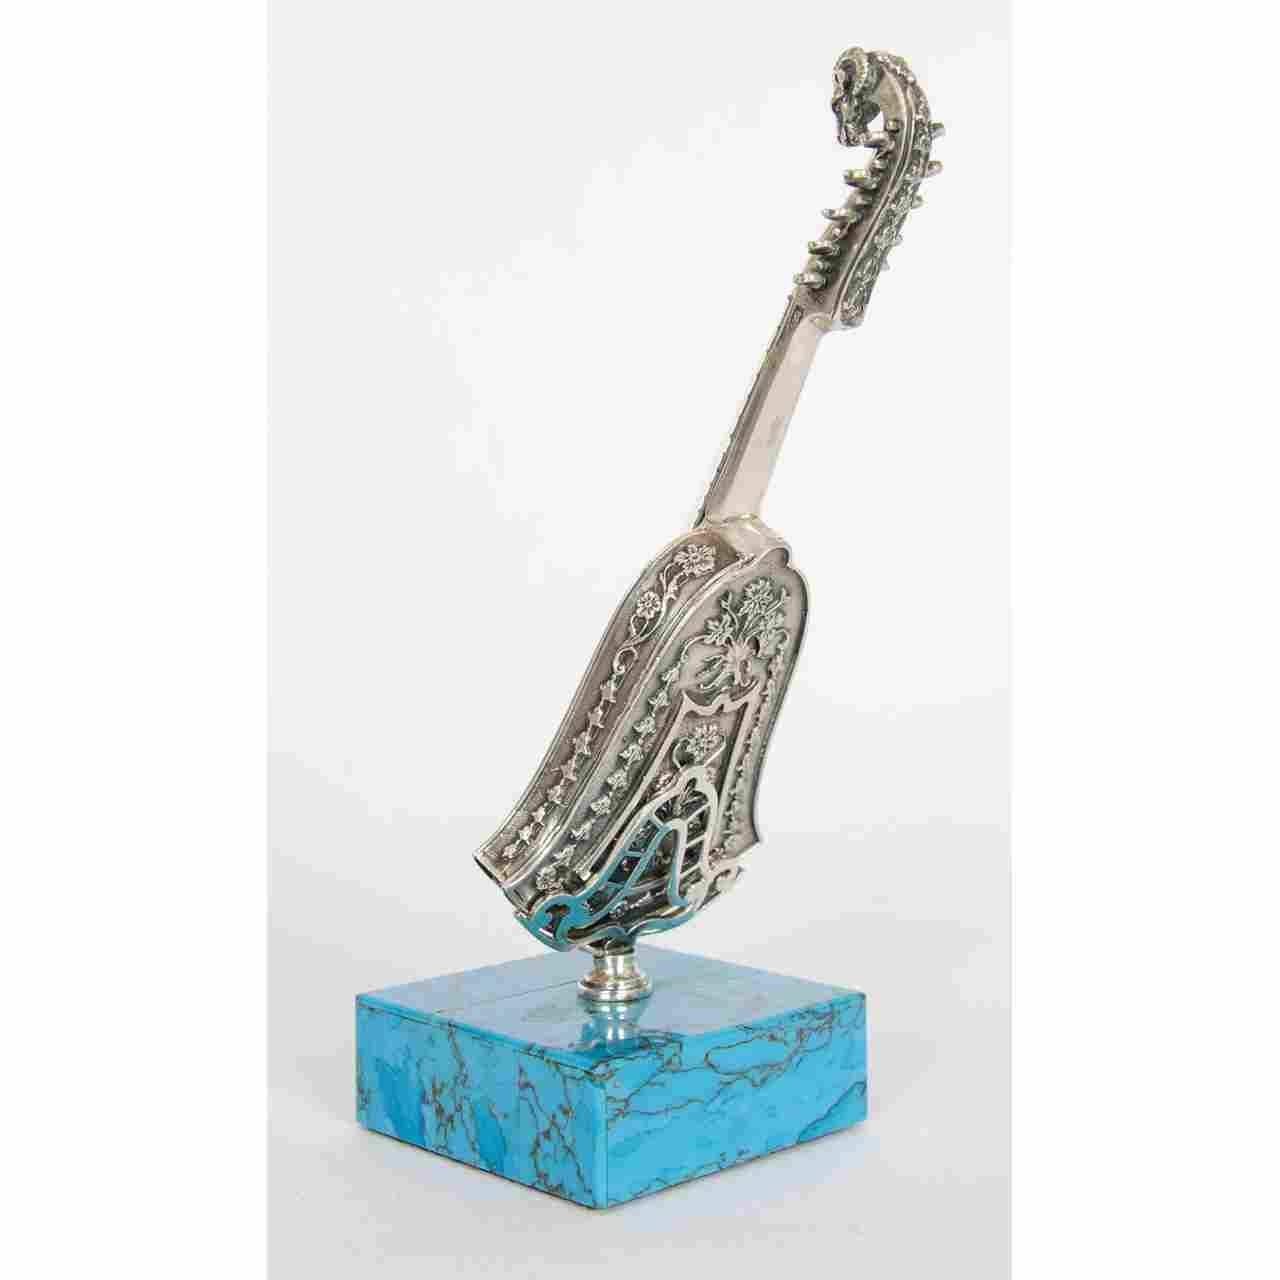 This fine antique set of musical instruments are crafted in miniature from luxurious materials including turquoise and silver. The set was made in the late 19th century in Vienna, which was highly celebrated for its music. 
The set comprises four